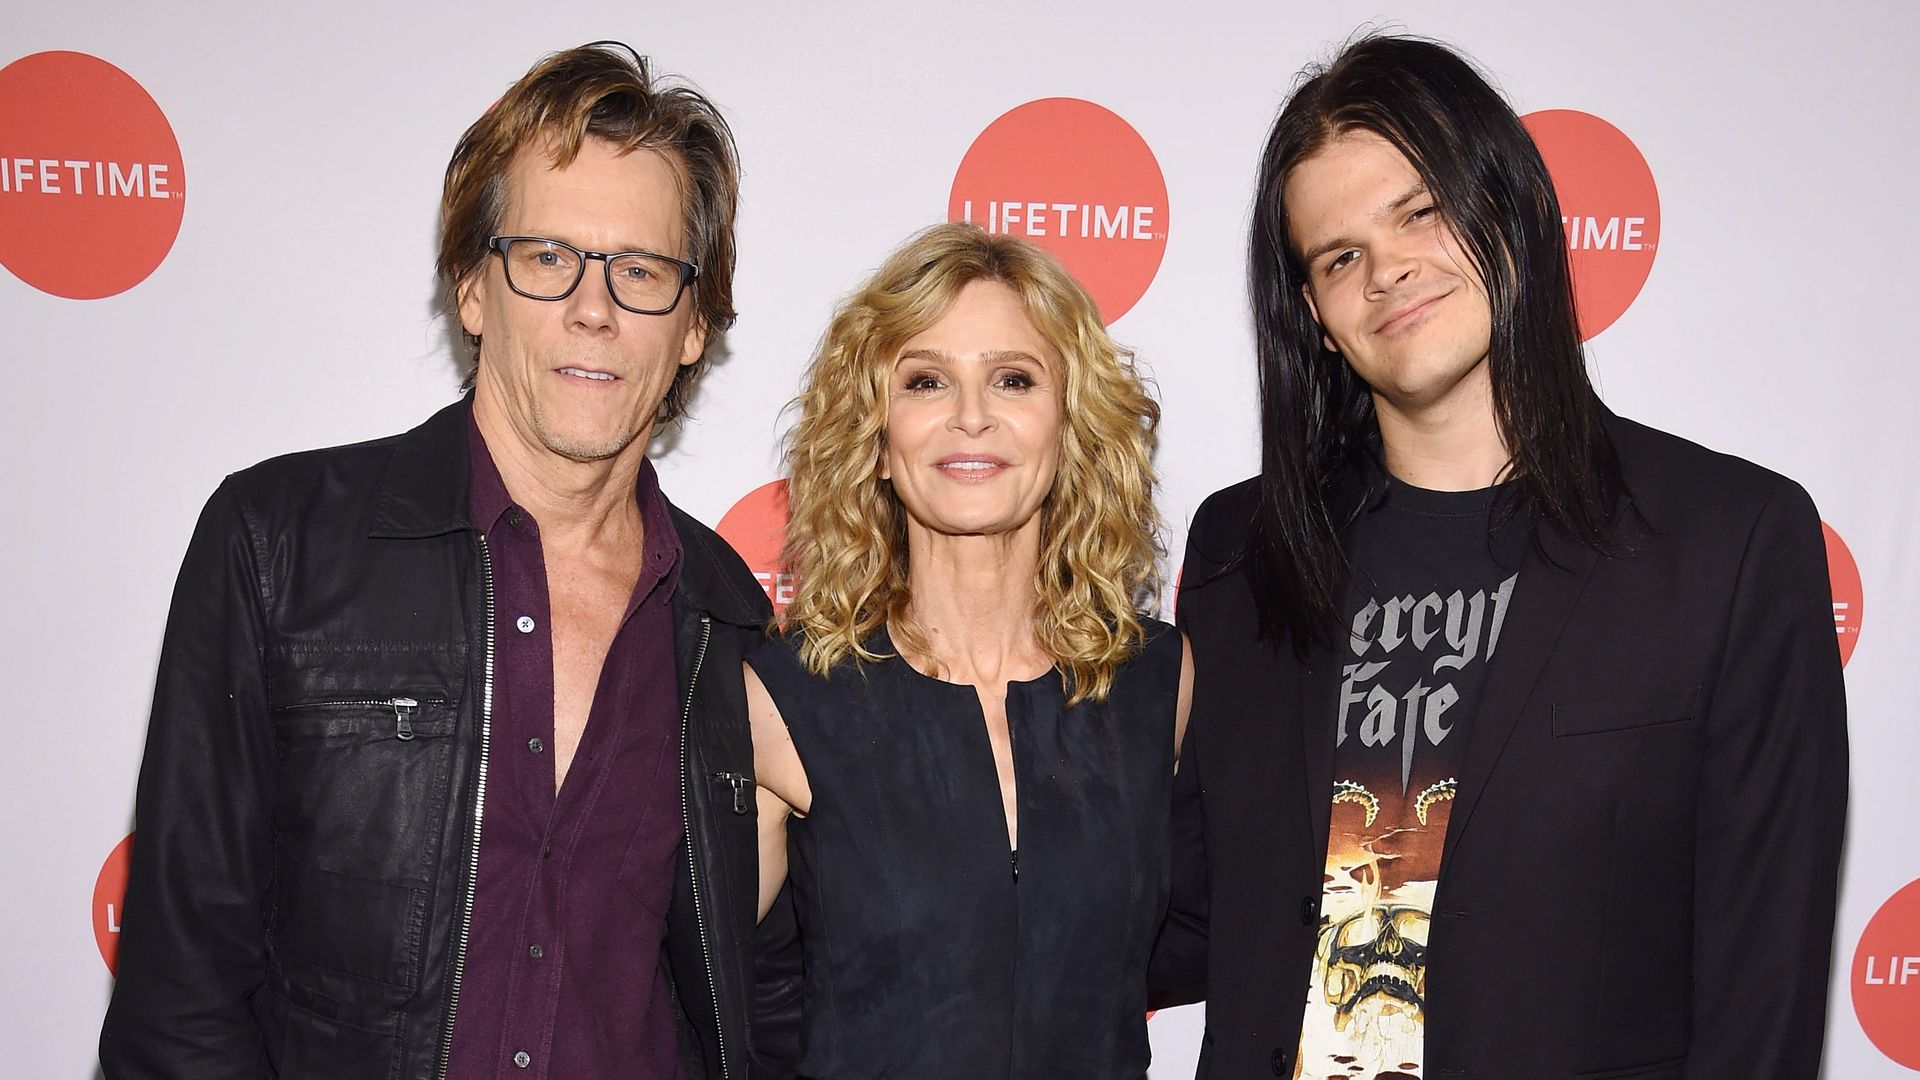 Kyra Sedgwick, Kevin Bacon and Travis Bacon attend the "Story Of A Girl" screening